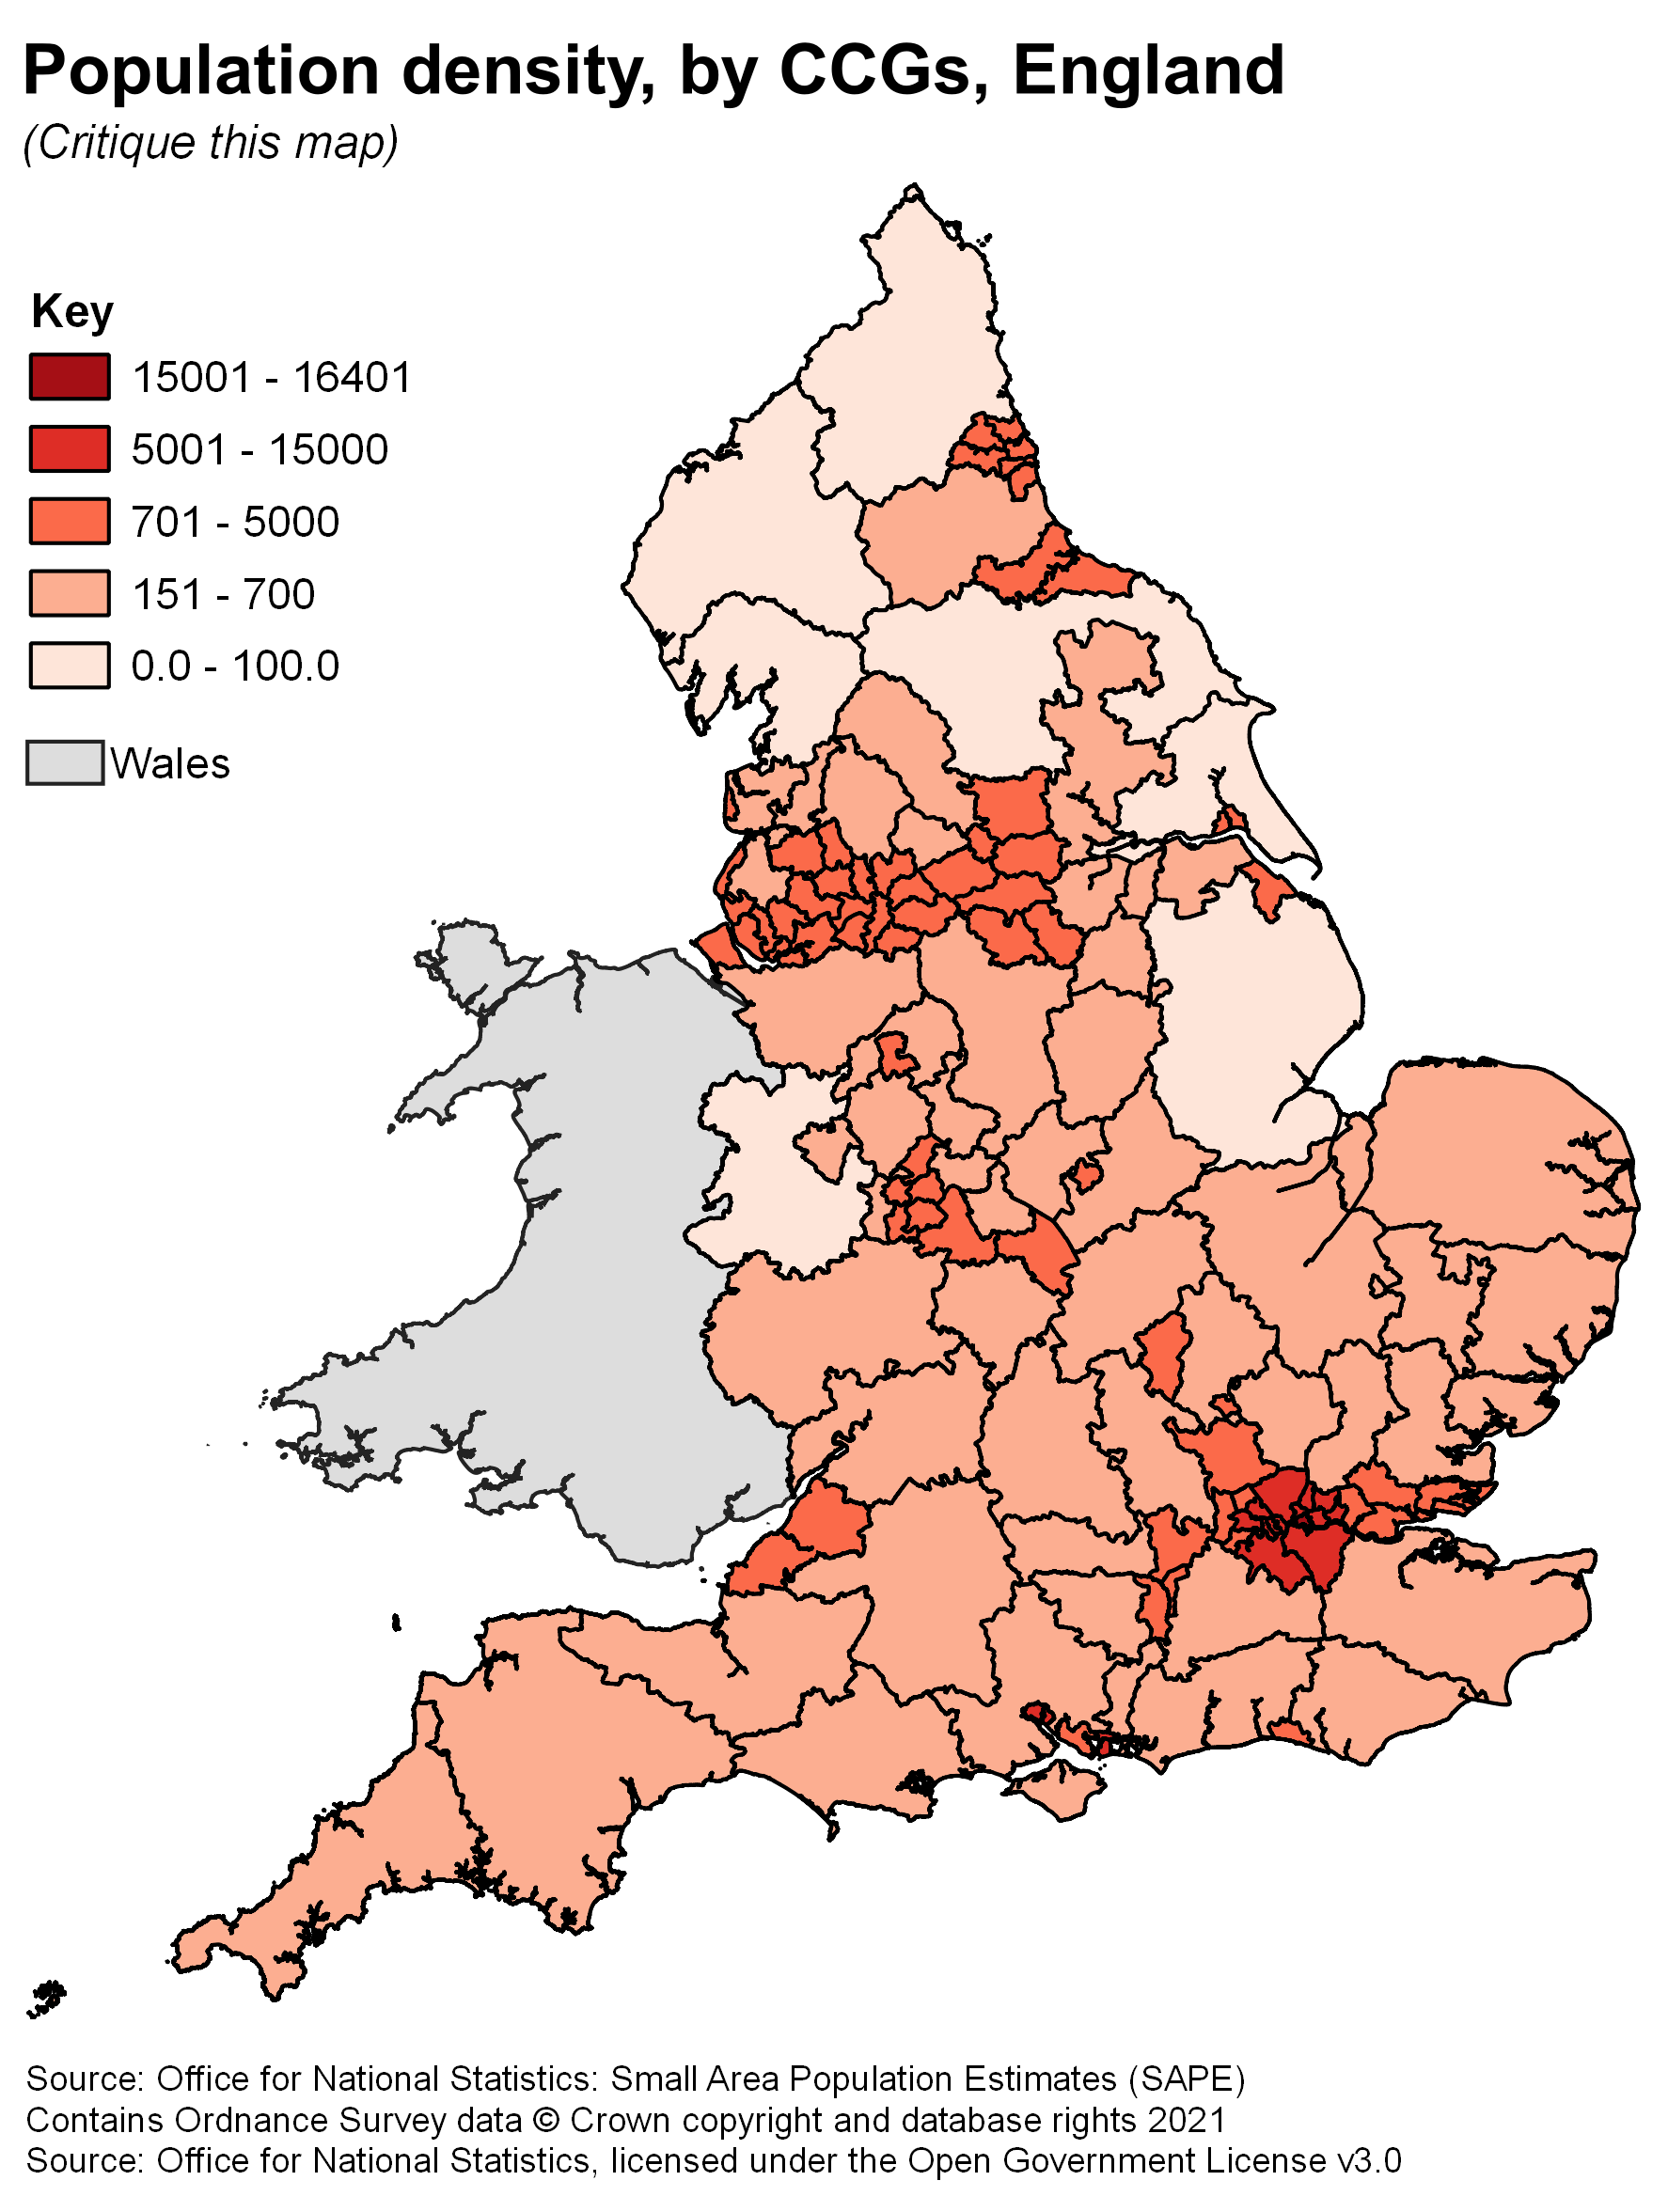 A bad version of a map showing population density by CCGs, England.